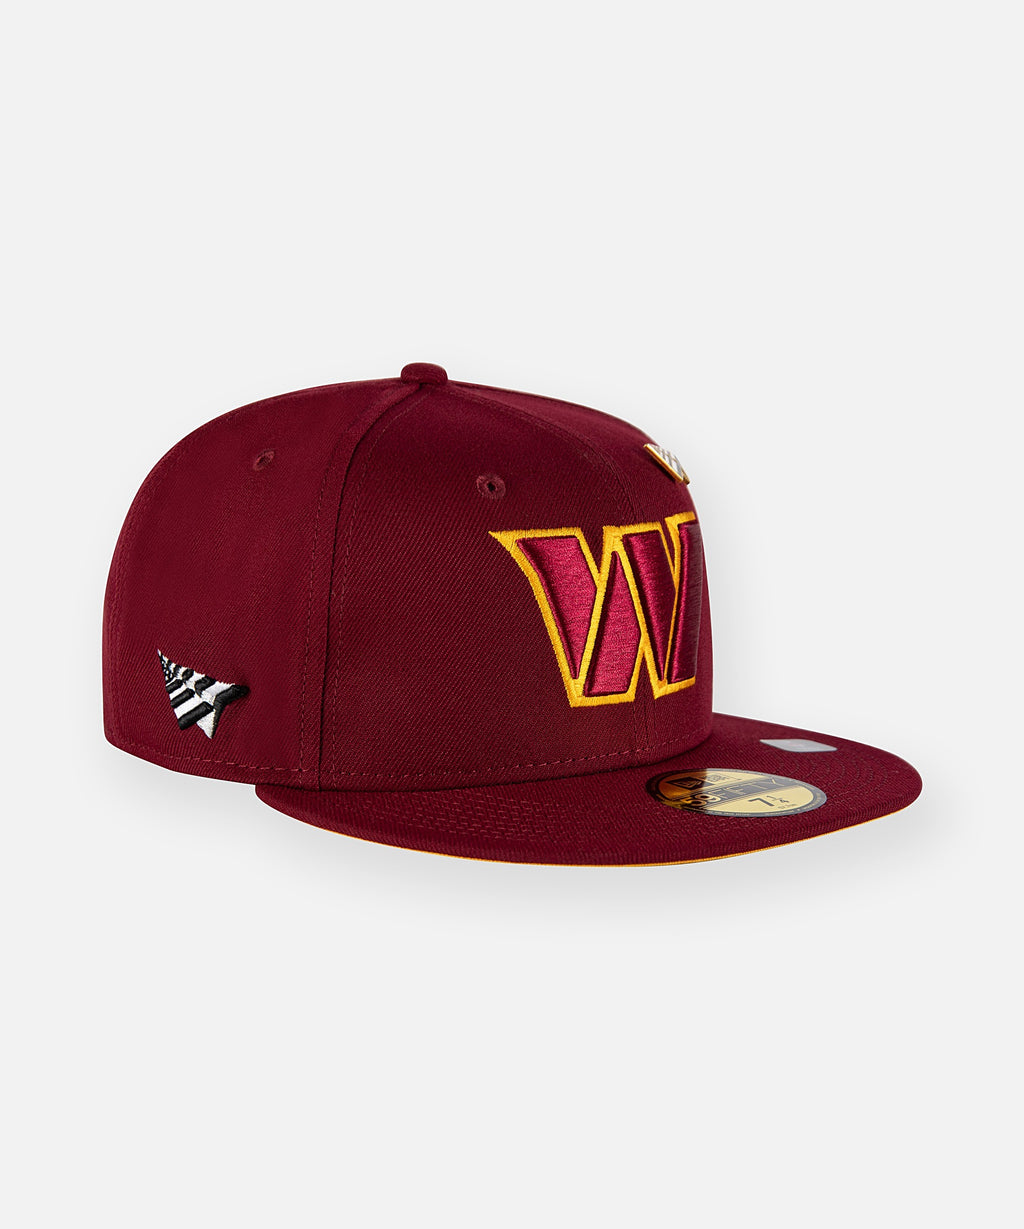 Paper Planes x Washington Commanders Team Color 59Fifty Fitted Hat_For Men_2